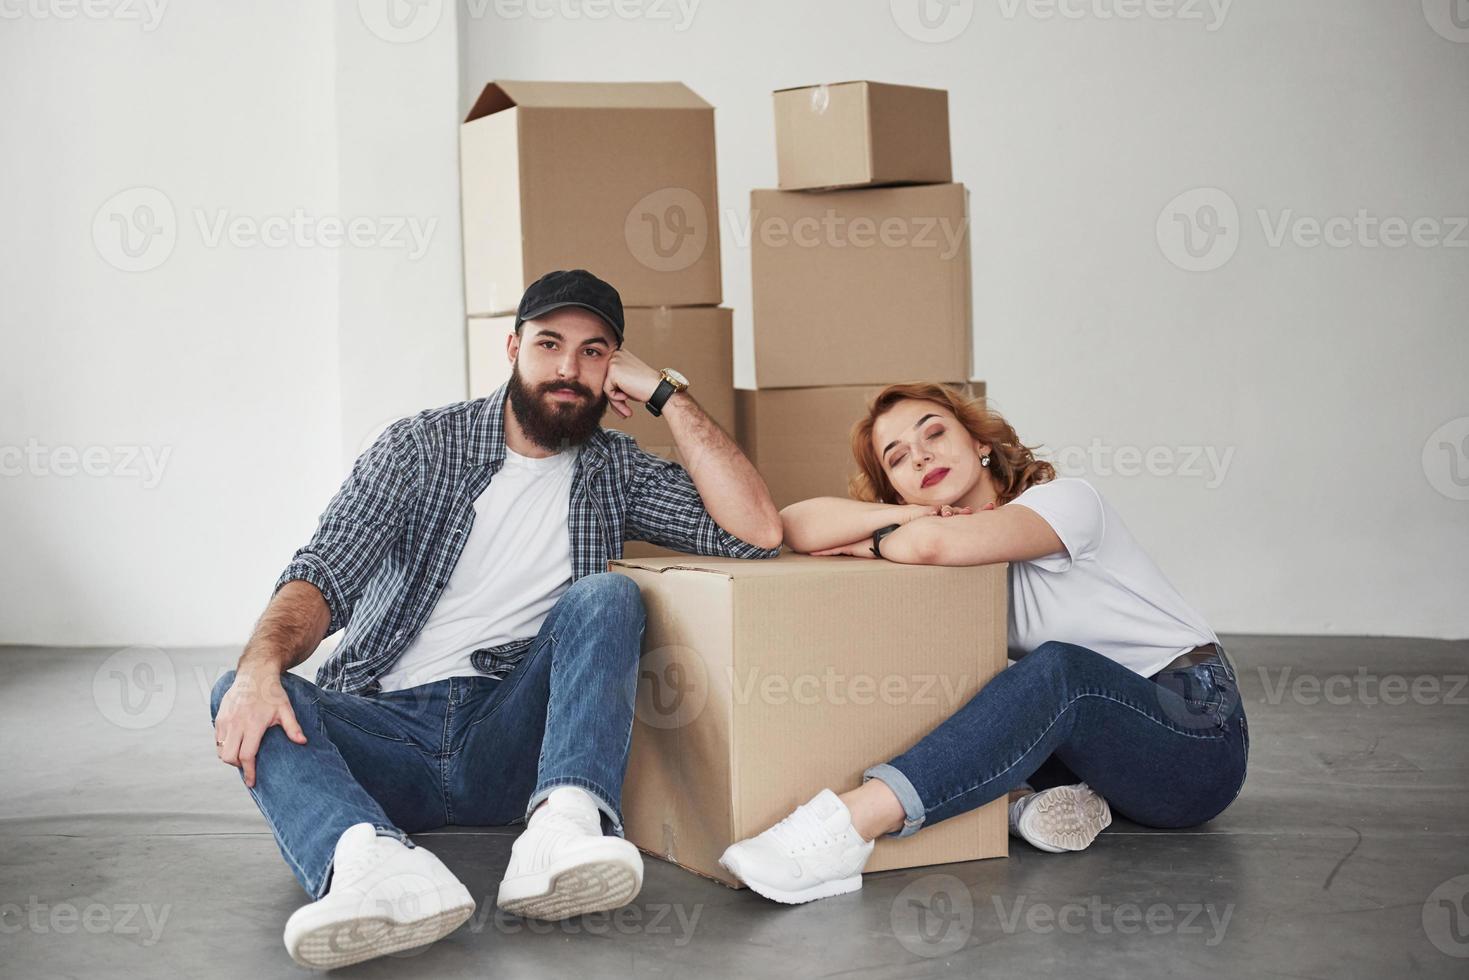 Tired after long road. Happy couple together in their new house. Conception of moving photo